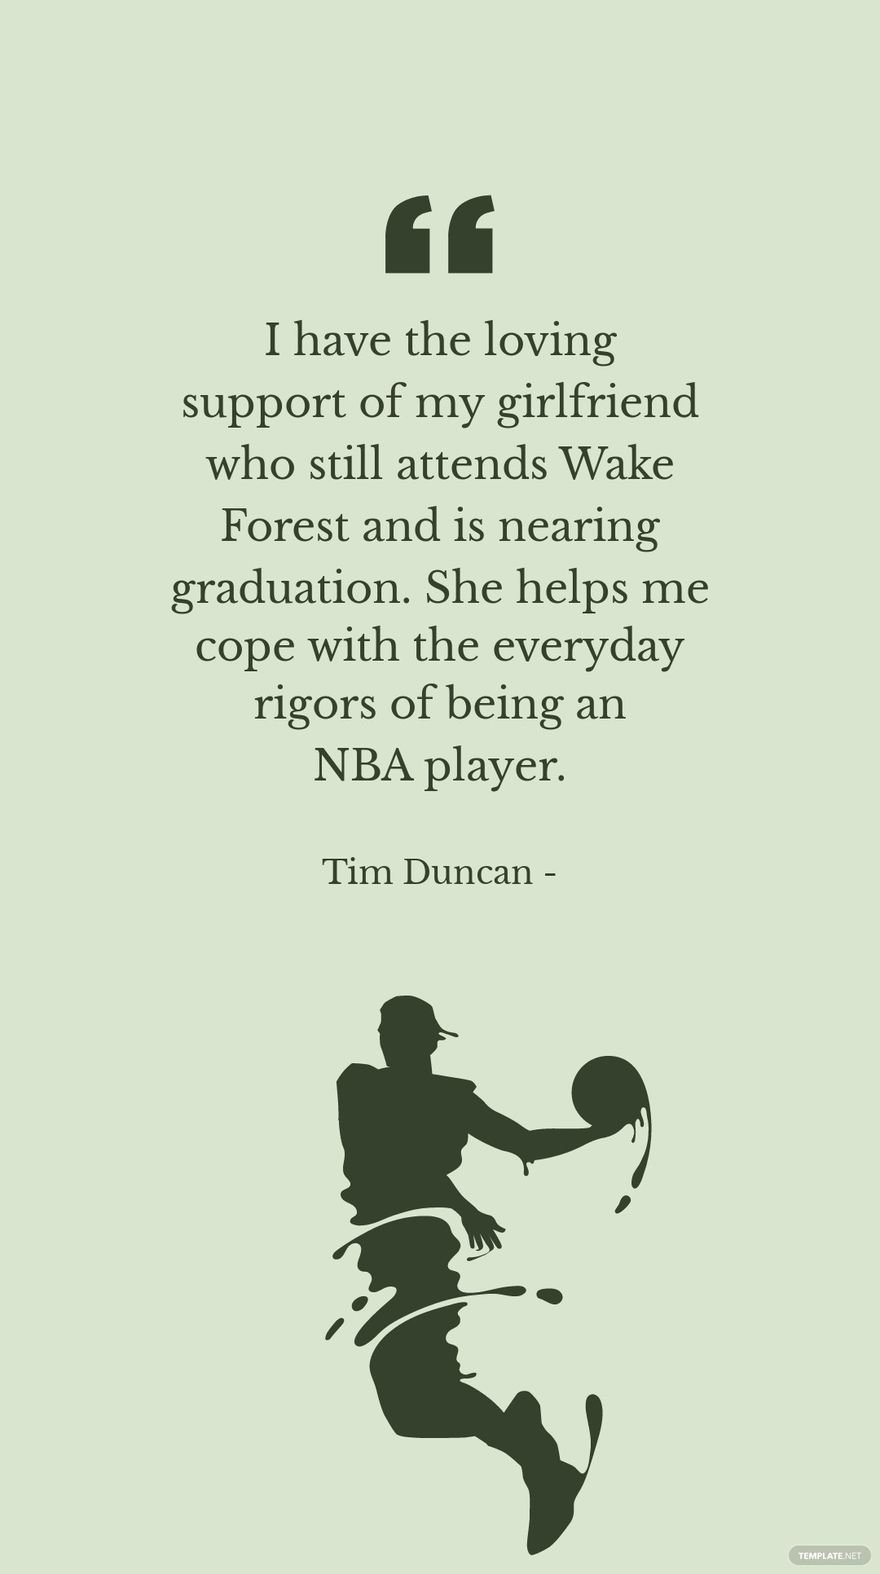 Tim Duncan - I have the loving support of my girlfriend who still attends Wake Forest and is nearing graduation. She helps me cope with the everyday rigors of being an NBA player.